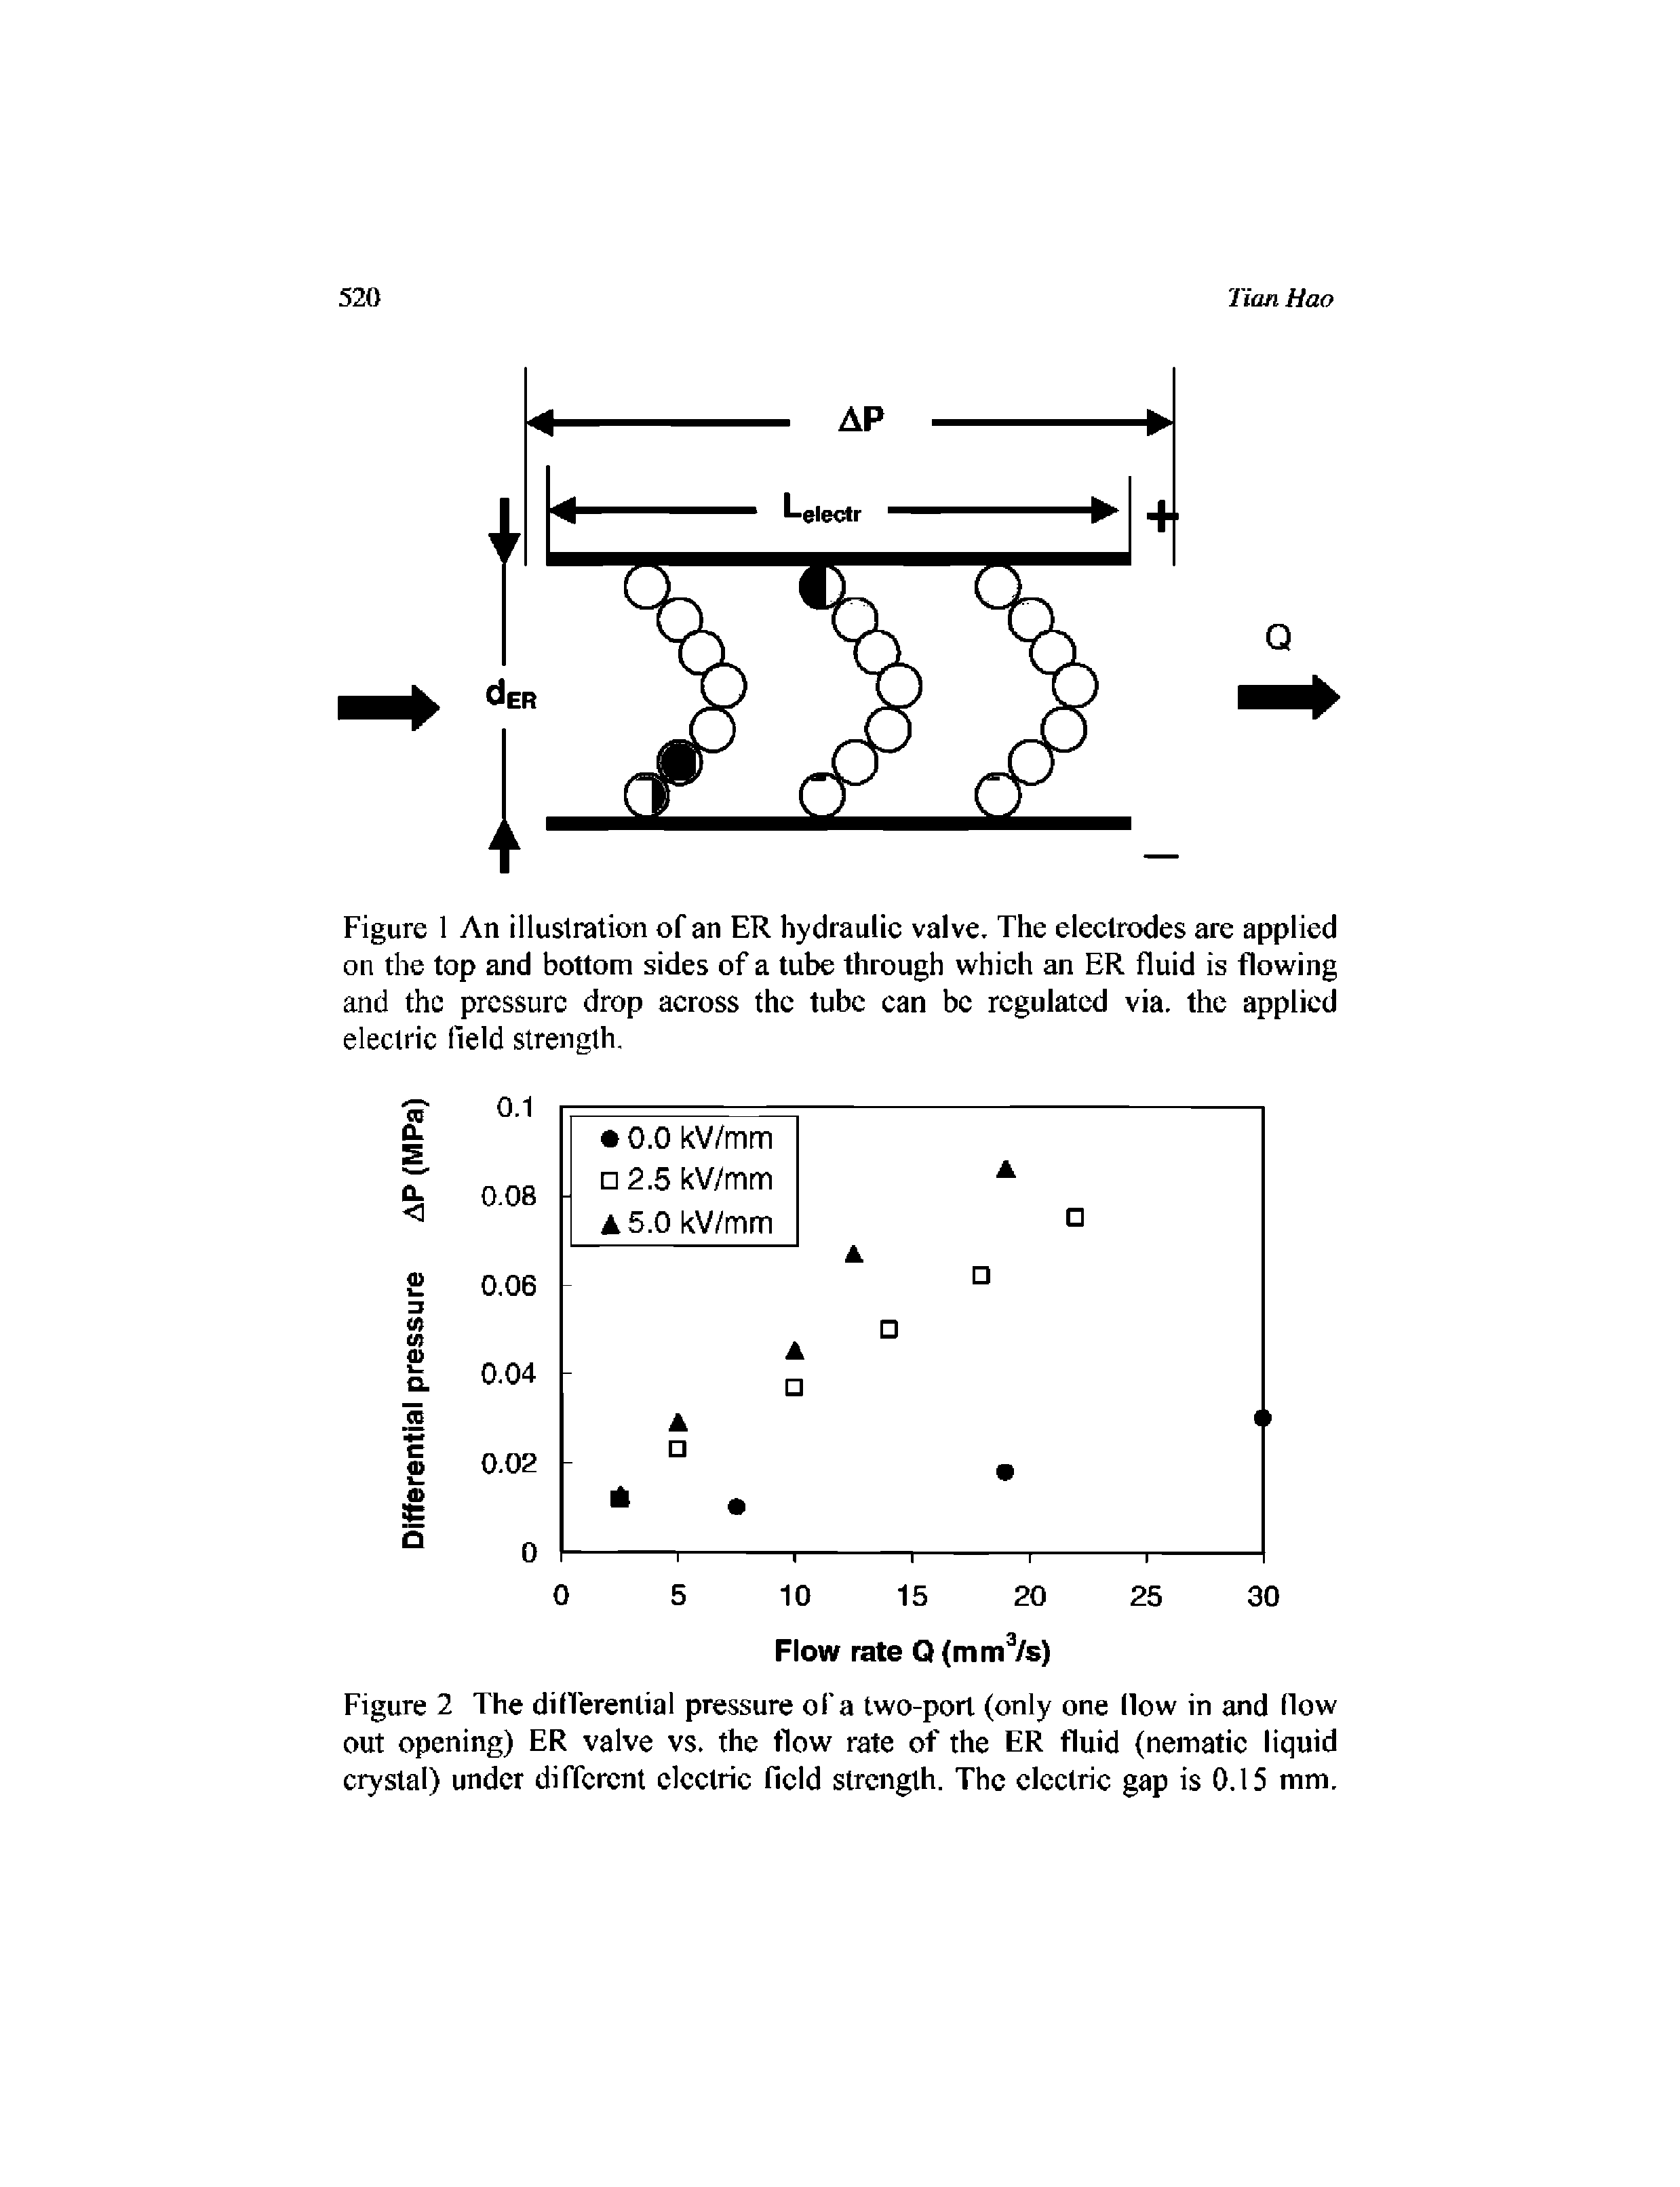 Figure 2 The dilTerenlial pressure of a two-port (only one How in and How out opening) ER valve vs. the flow rate of the ER fluid (neinatie liquid crystal) under different electric field strength. The electric gap is 0.15 mm.